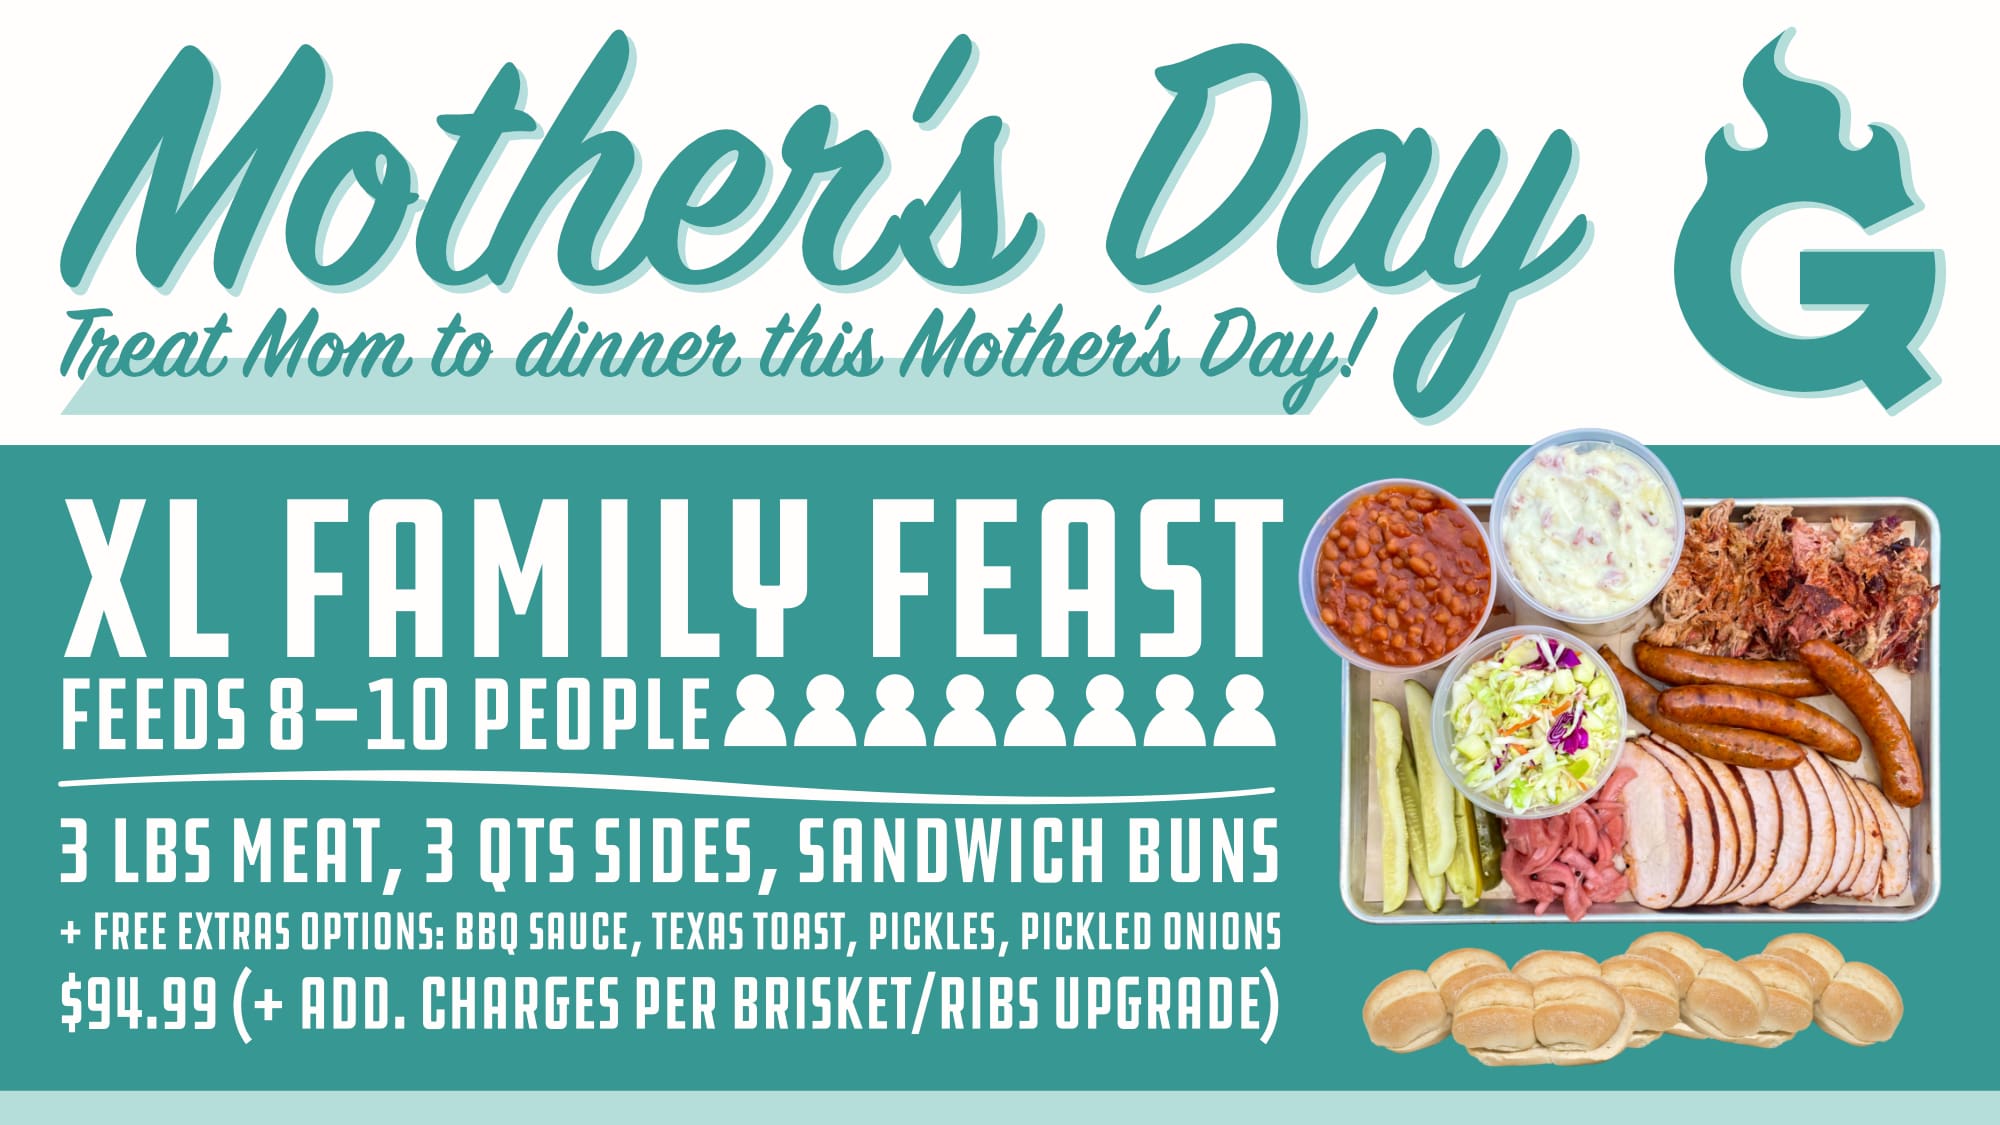 Treat Mom to dinner this Mother’s Day!